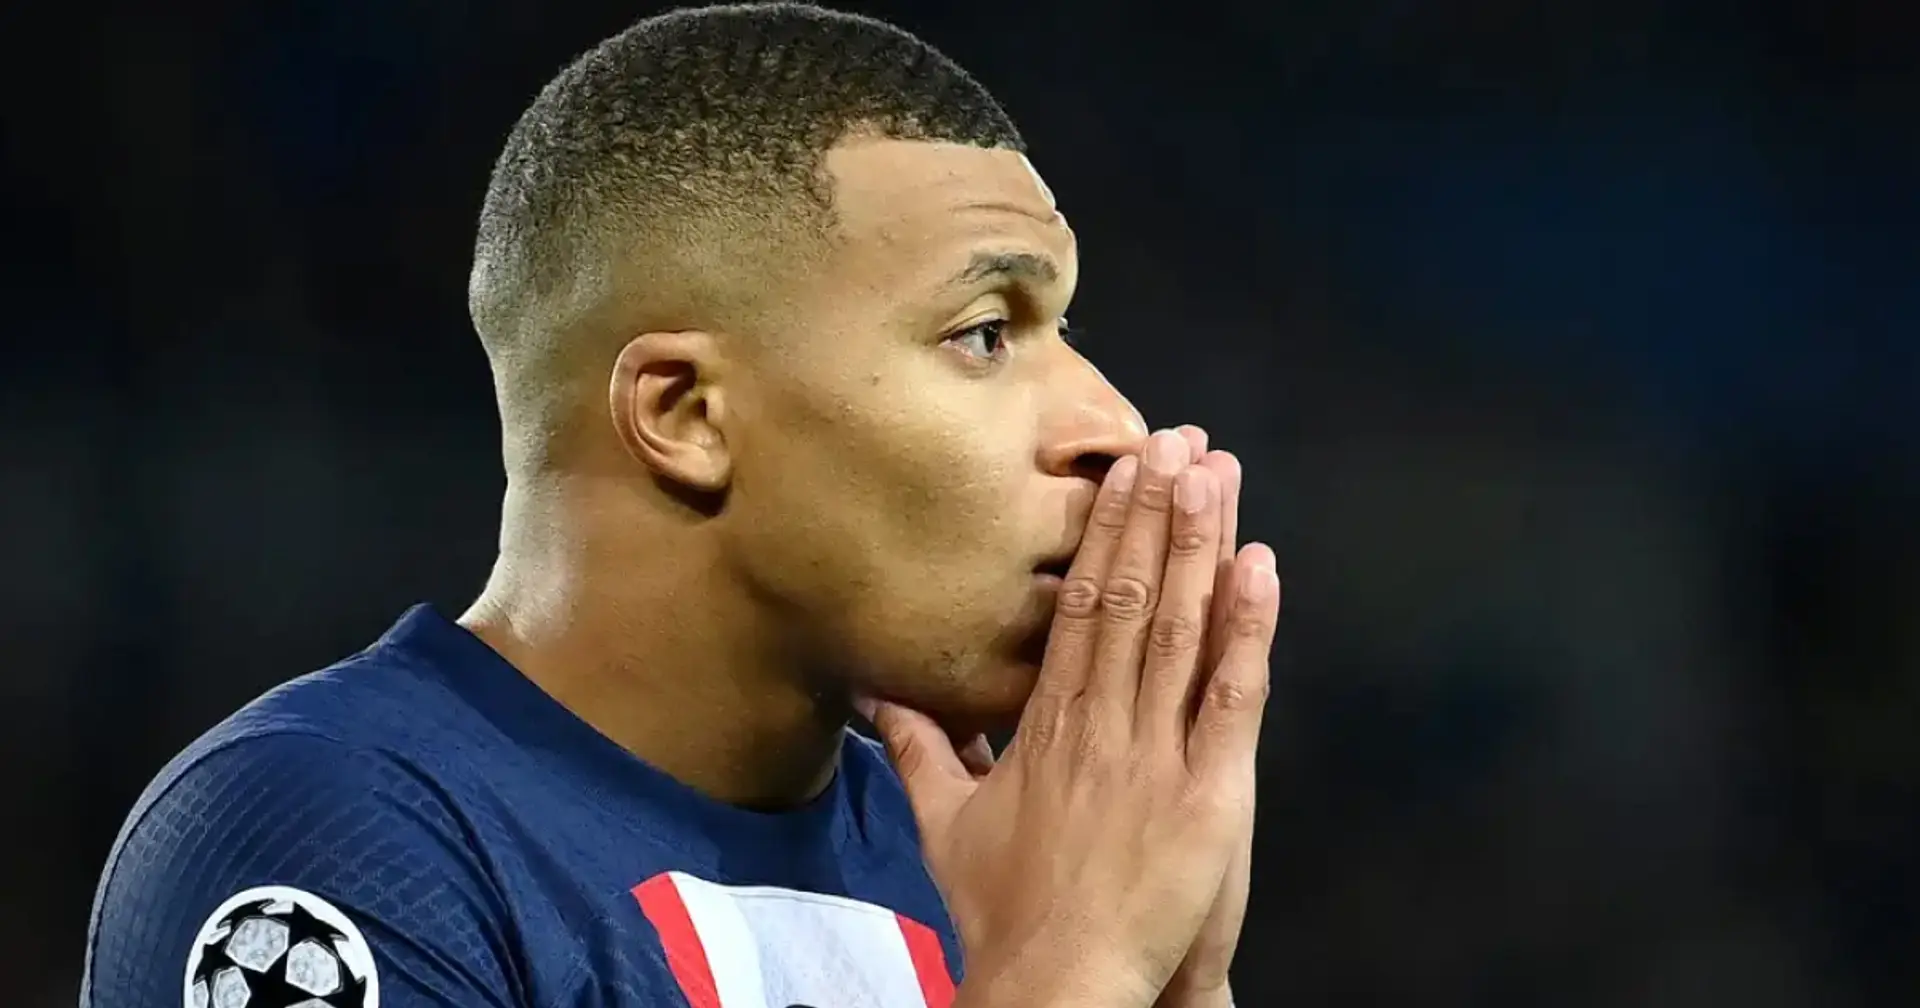 PSG players anonymously vote for new captain, Mbappe ignored